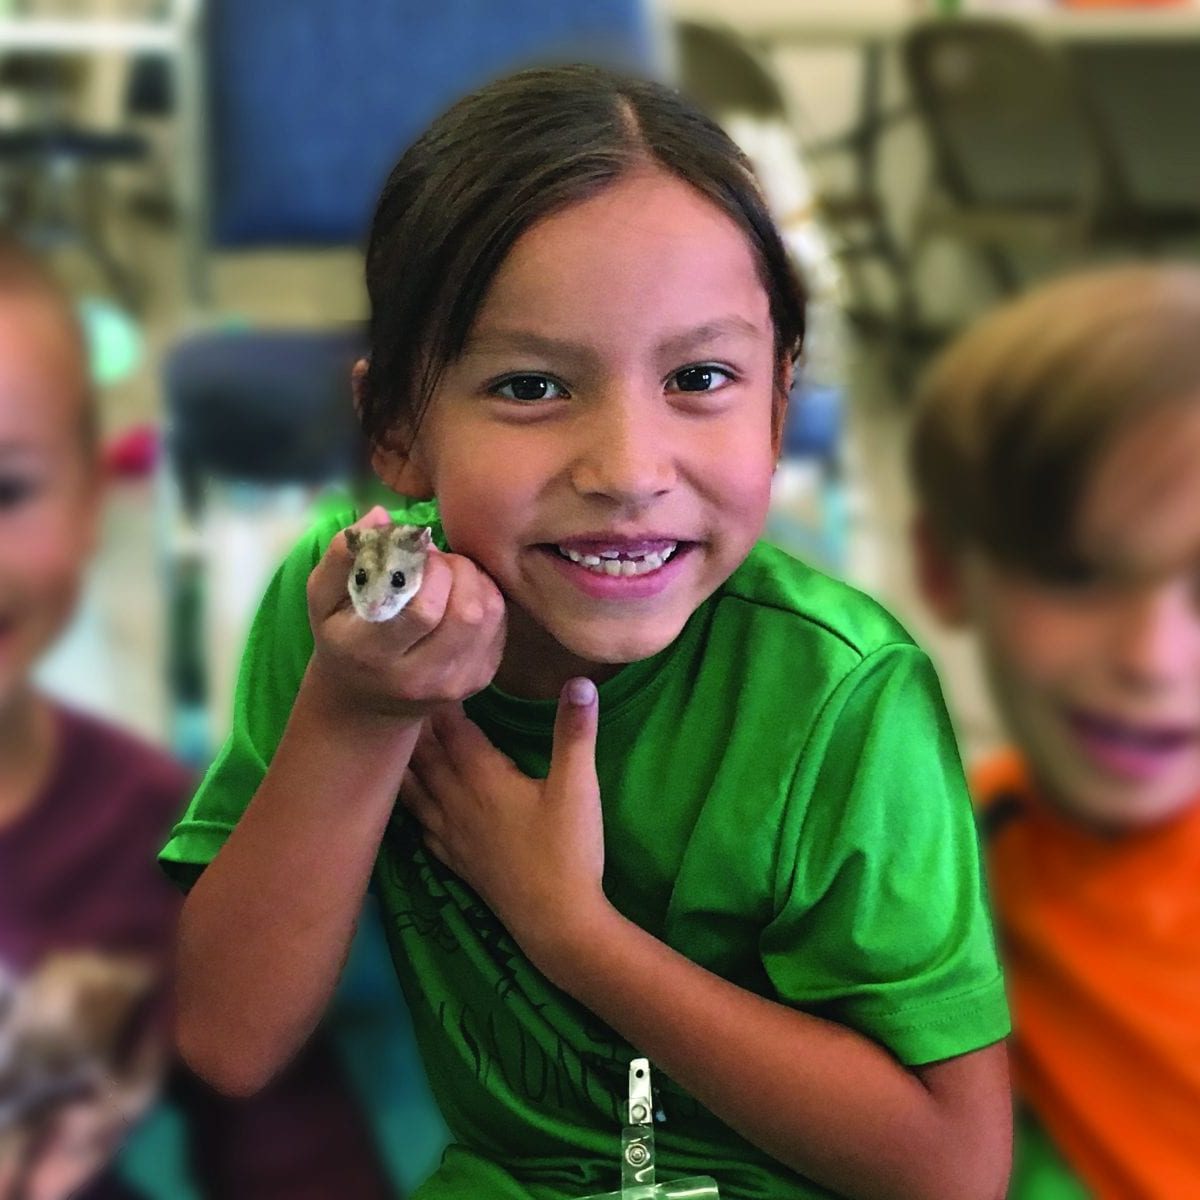 Girl with green shirt smiling and holding hamster